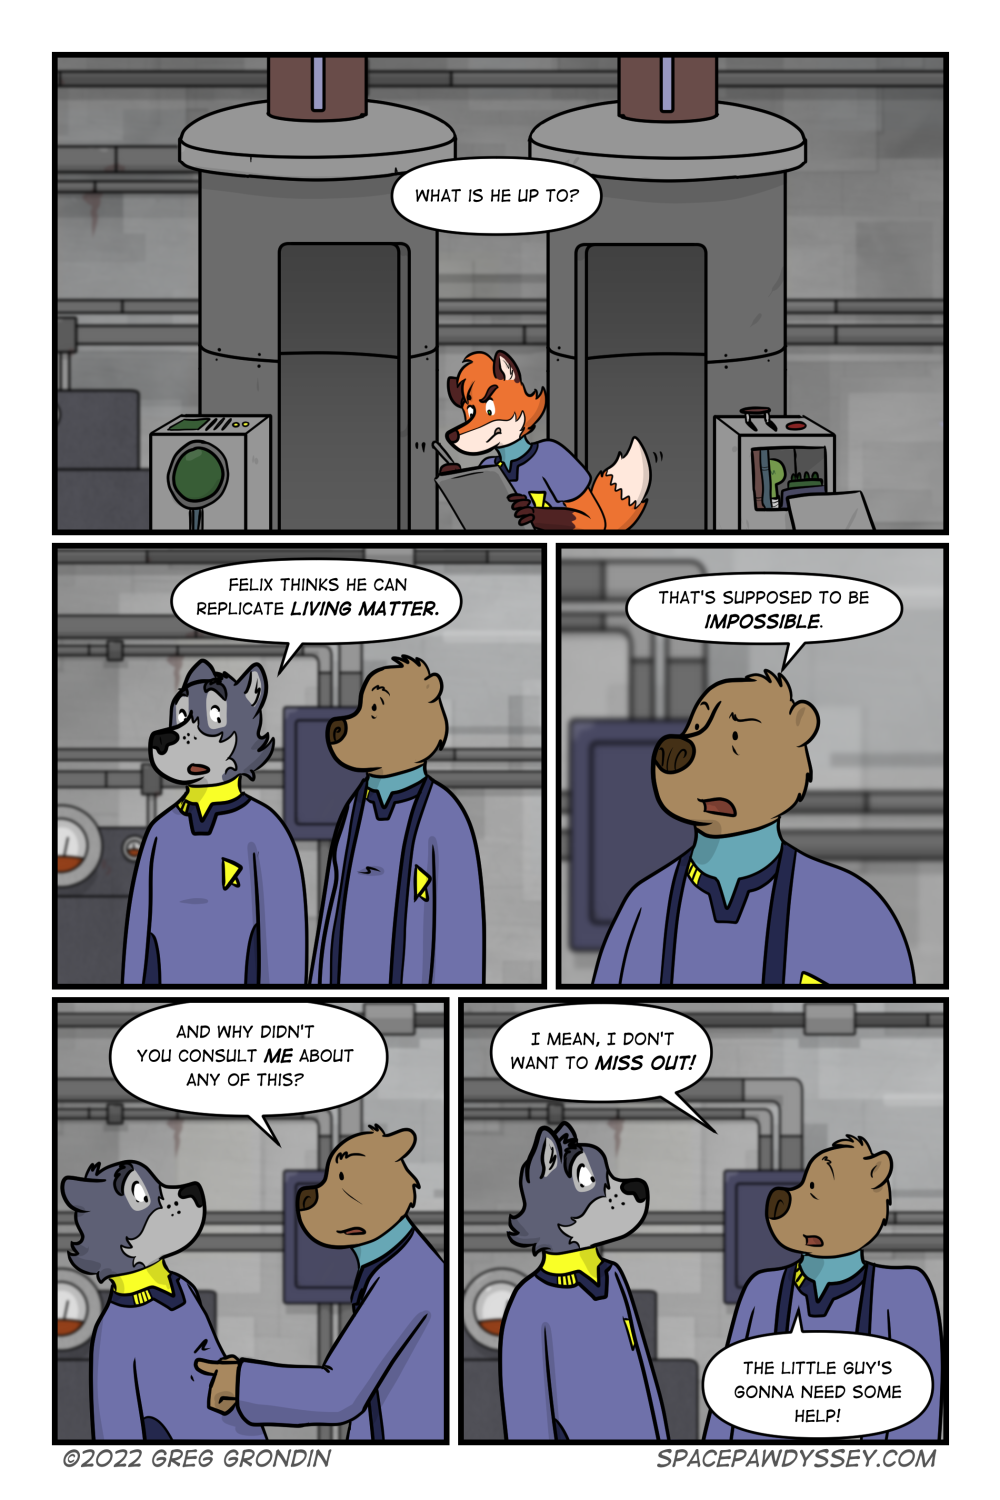 Space Pawdyssey #552